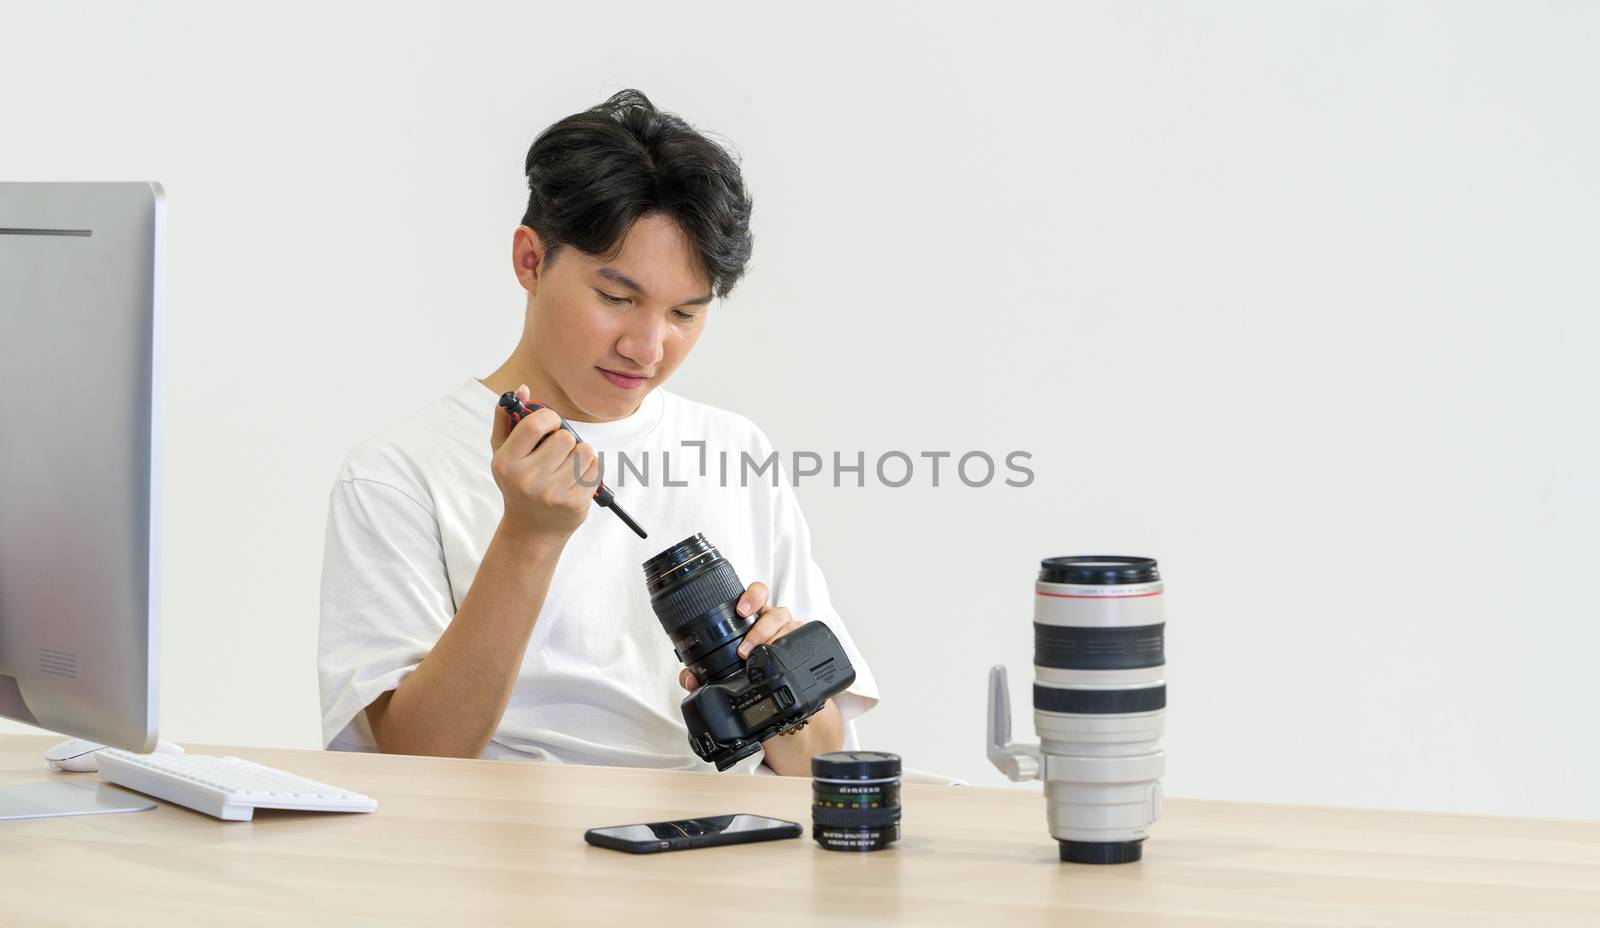 An Asian photographer is cleaning the camera and lens with a blower camera for cleaning on his desk. The atmosphere in the photo studio.